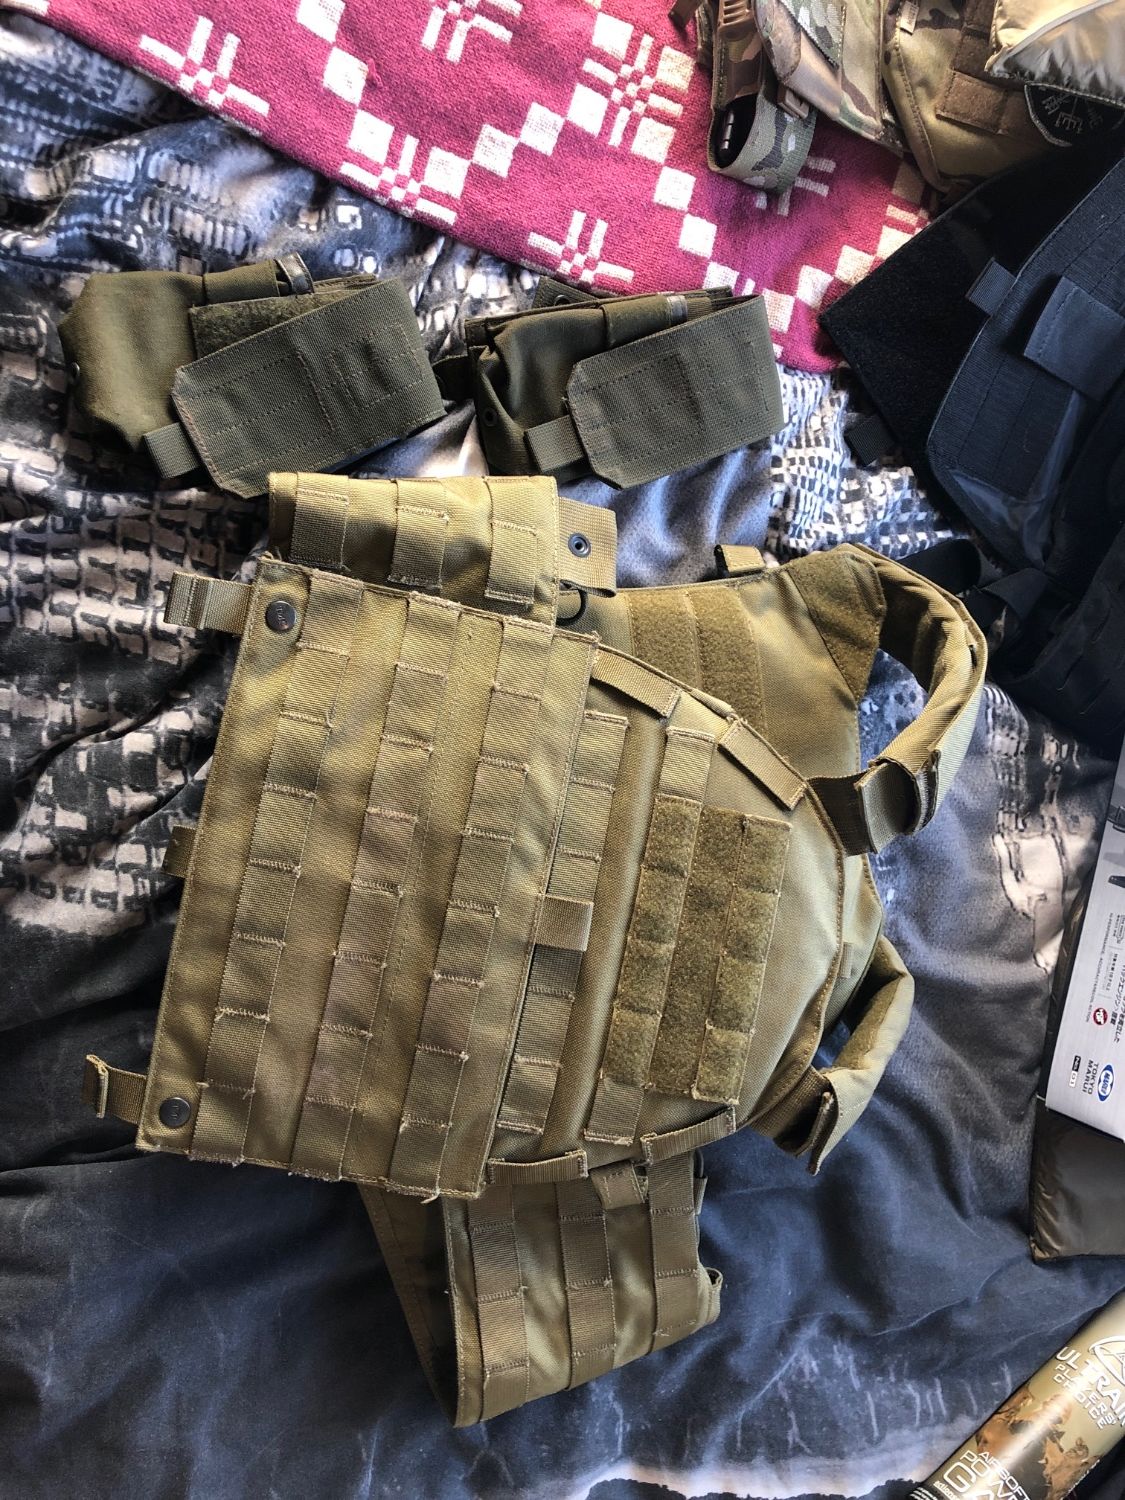 Tmc plate carrier and pouches - Gear - Airsoft Forums UK